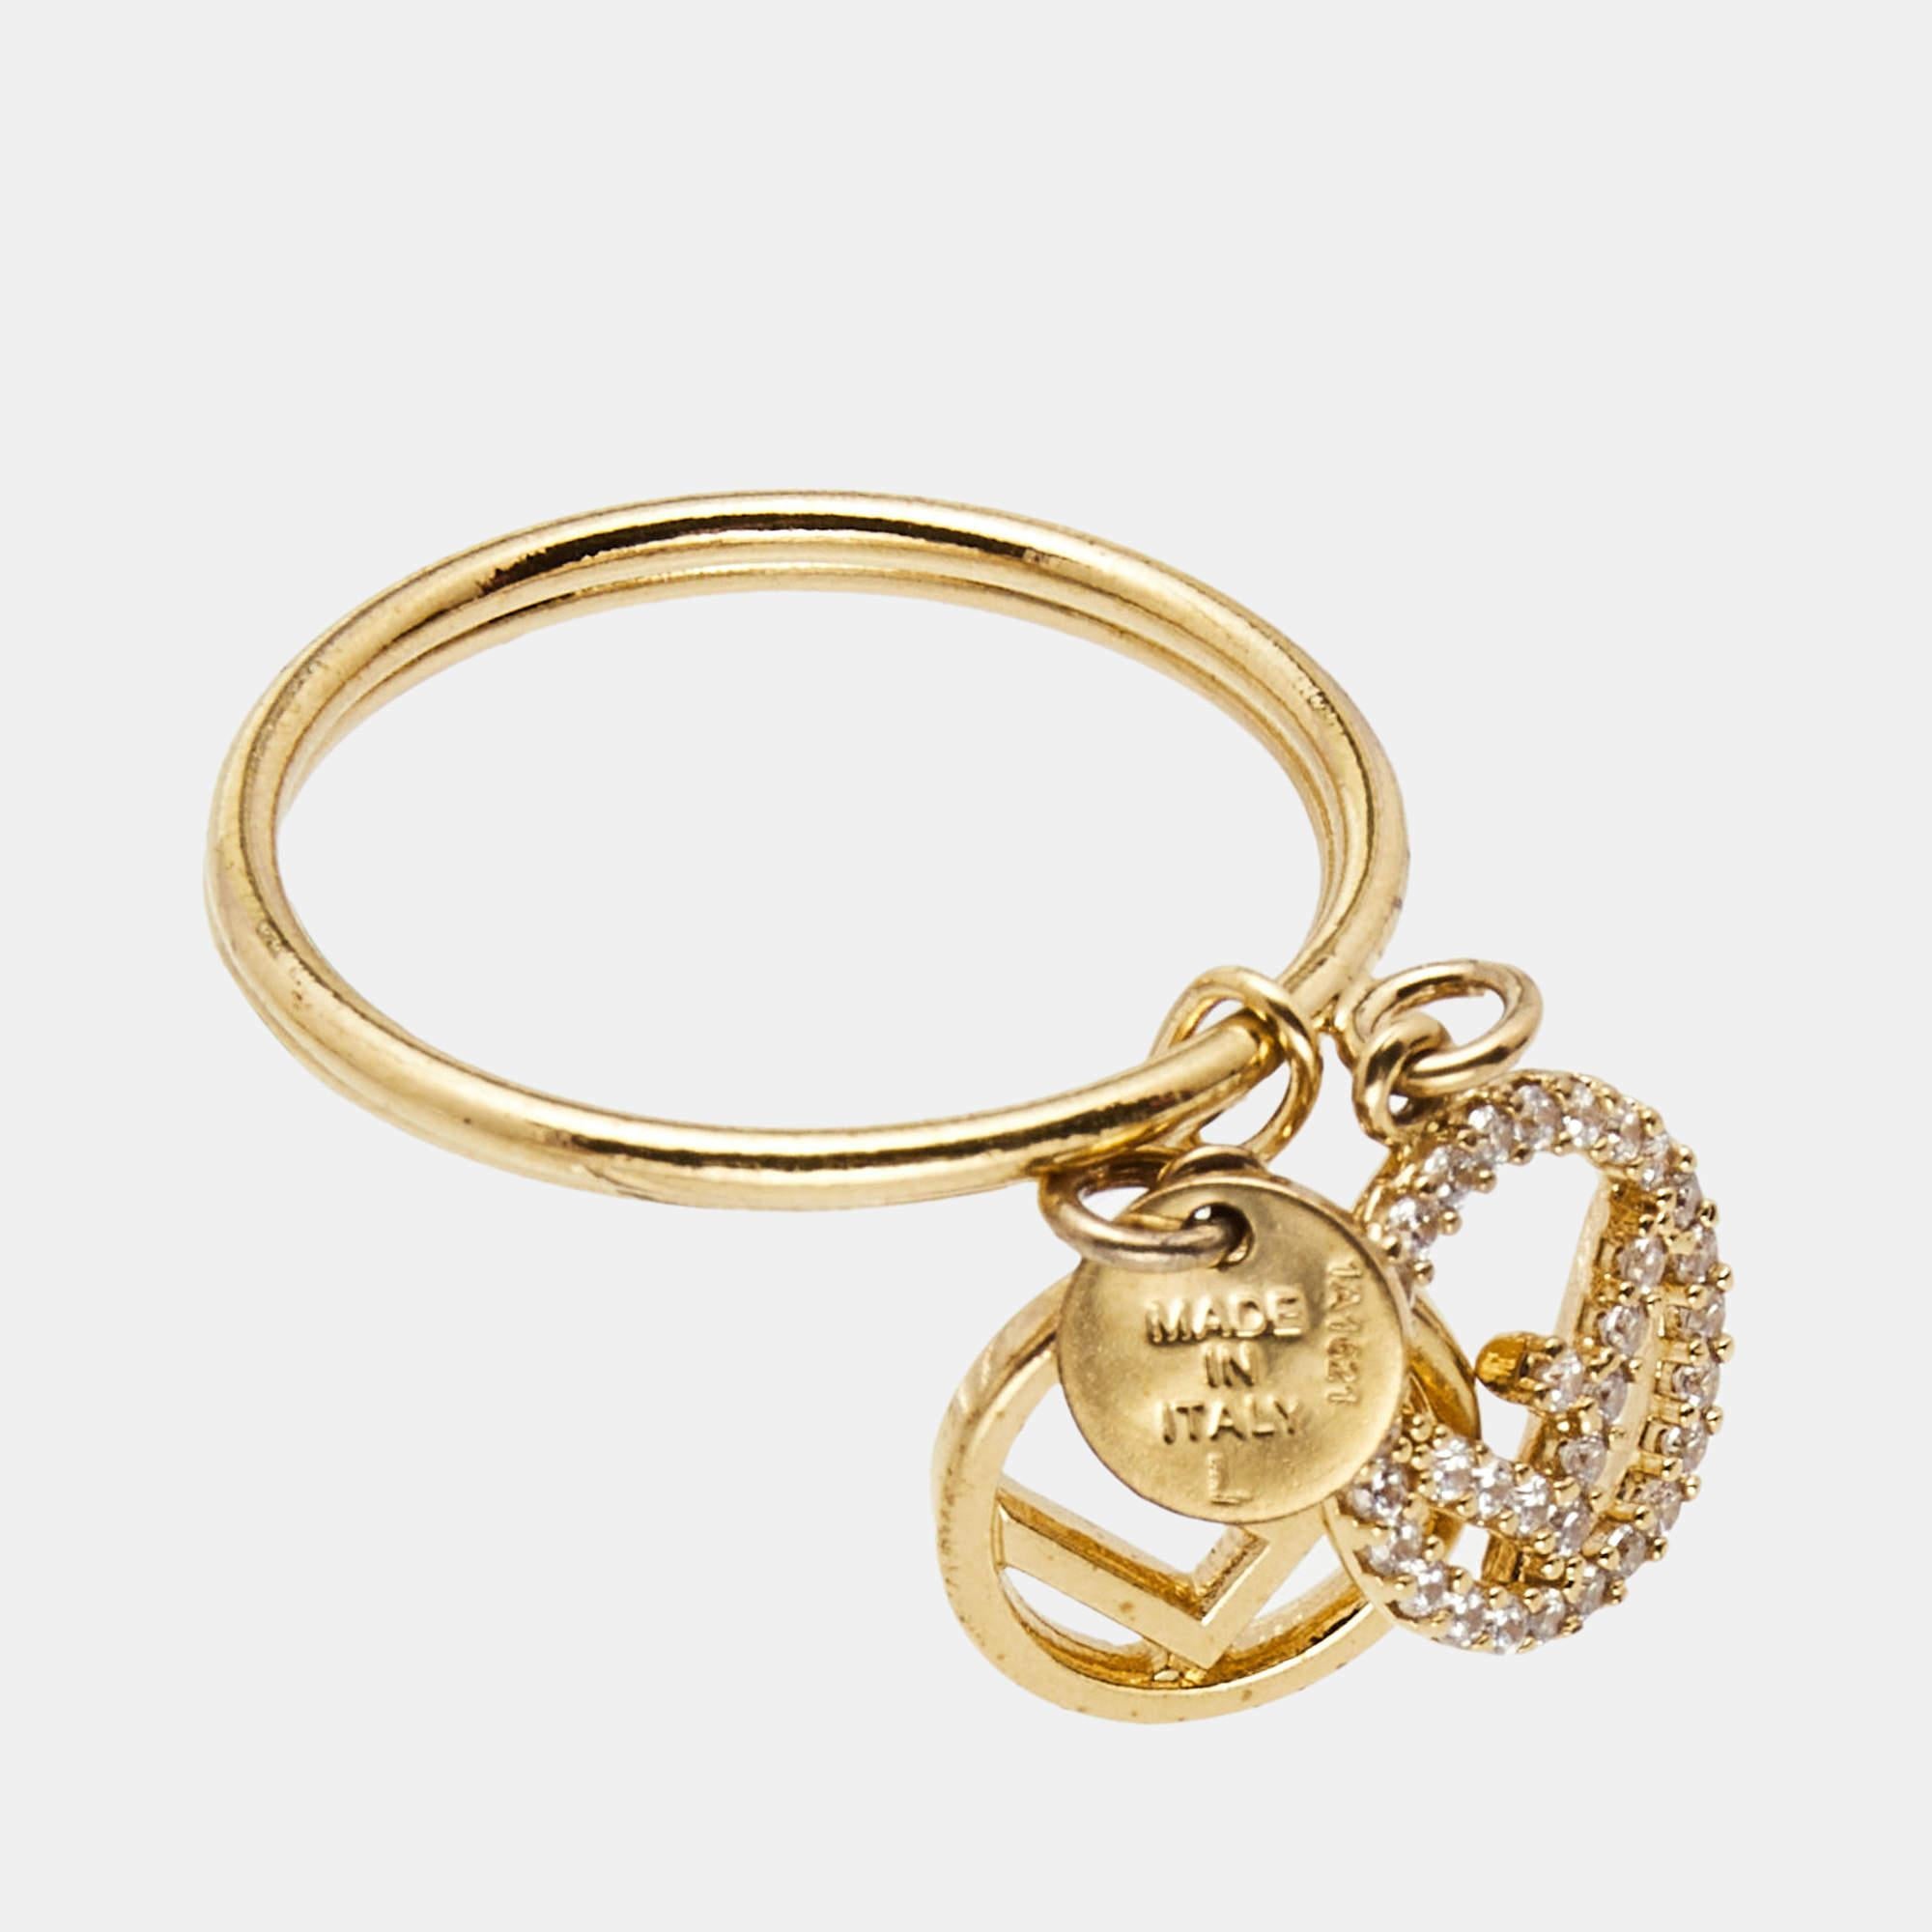 The Fendi F is Fendi ring is a stylish and luxurious accessory. It features the iconic Fendi logo as a double charm in a lustrous gold tone, making it a statement piece for fashion-conscious individuals.

Includes: Original Box

